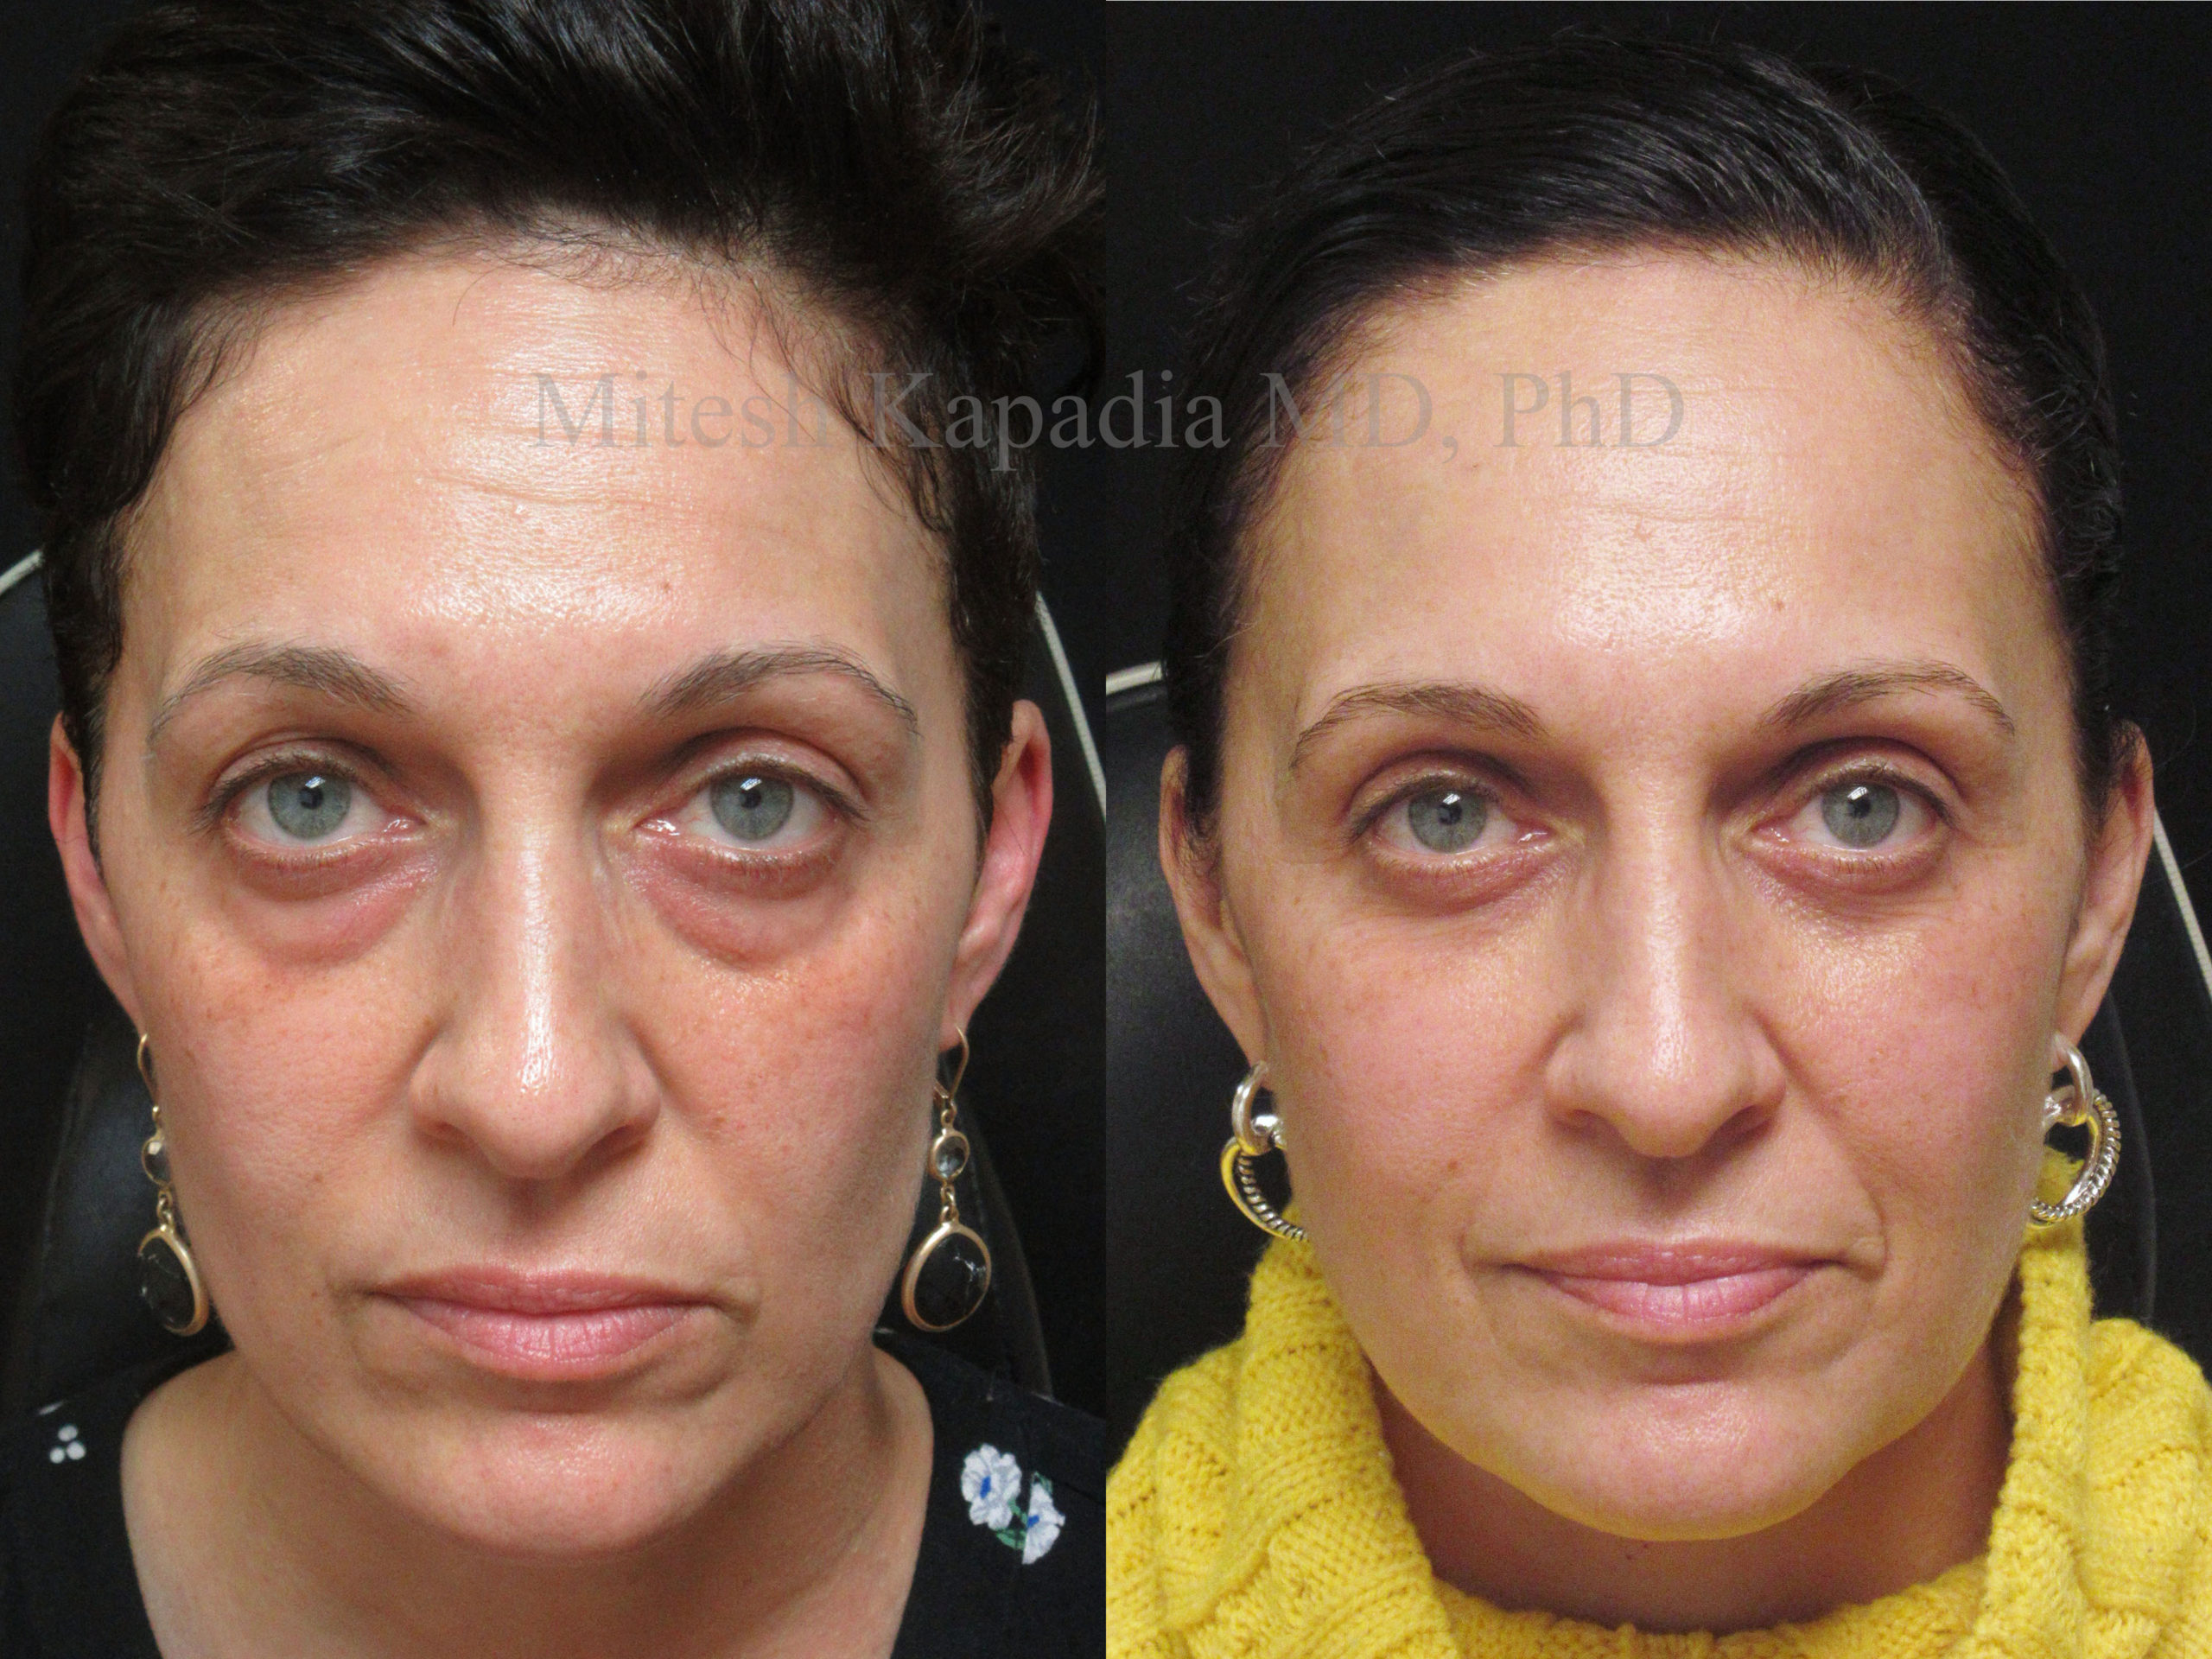 Patient 1 - Before and seven months after lower blepharoplasty surgery.